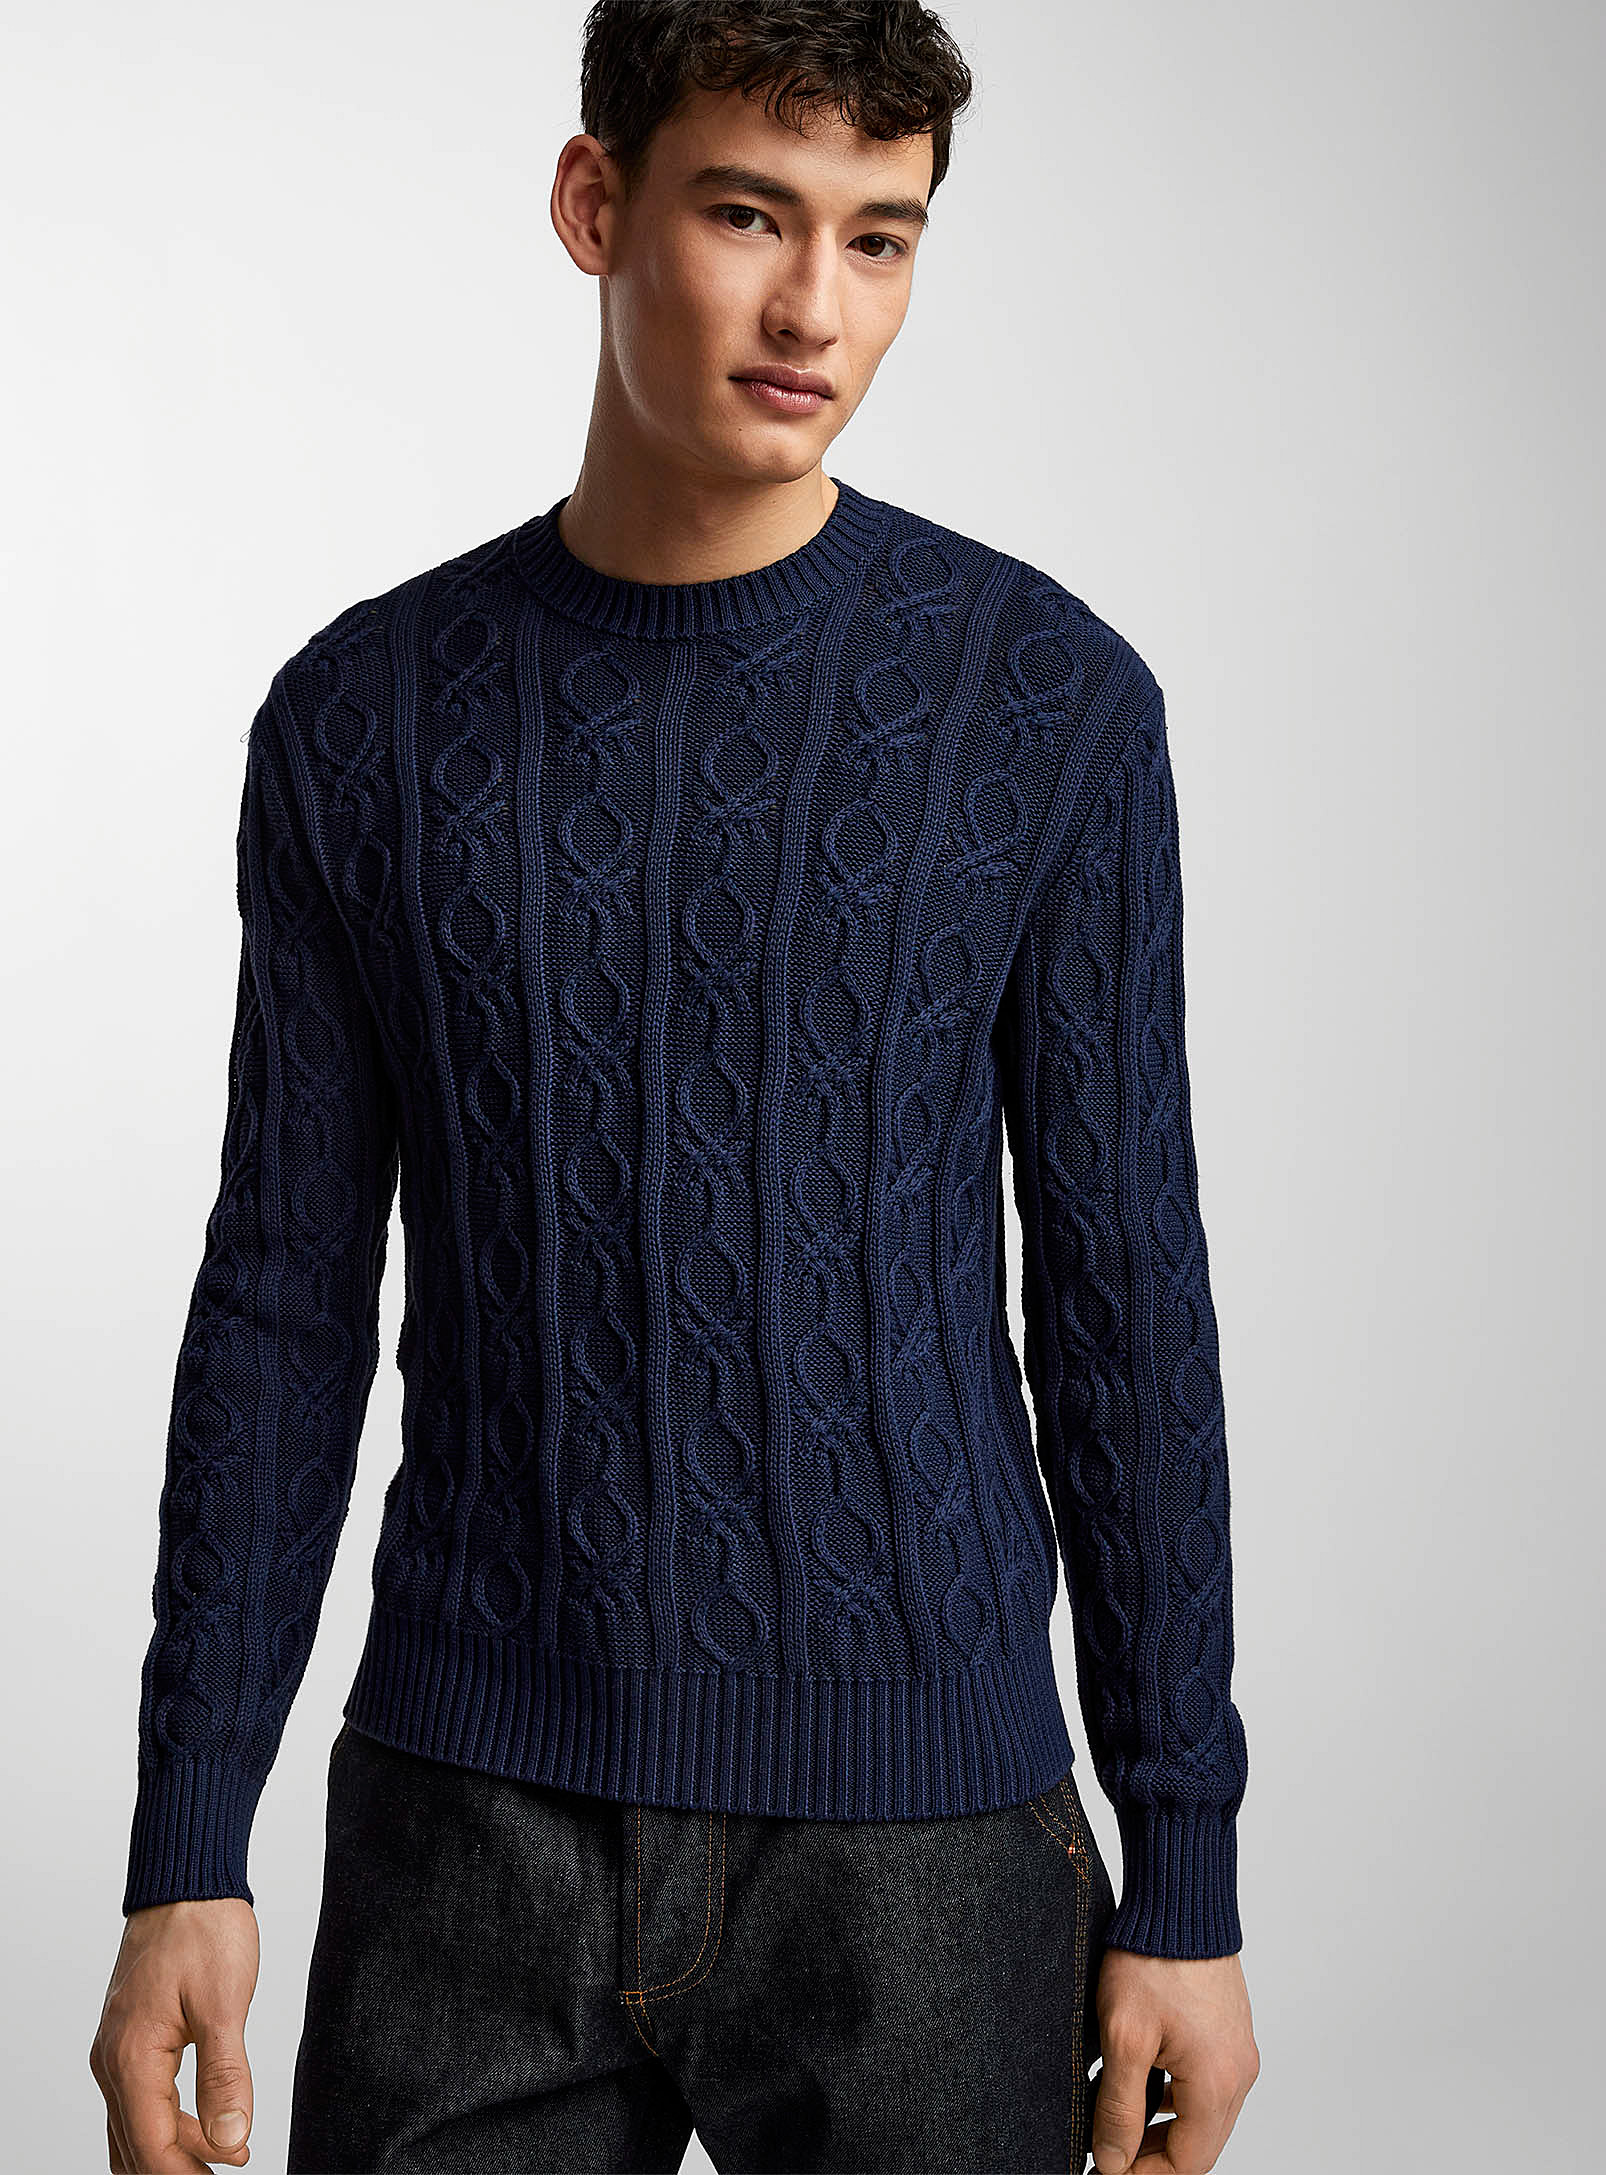 United Colors of Benetton - Men's Signature cable sweater